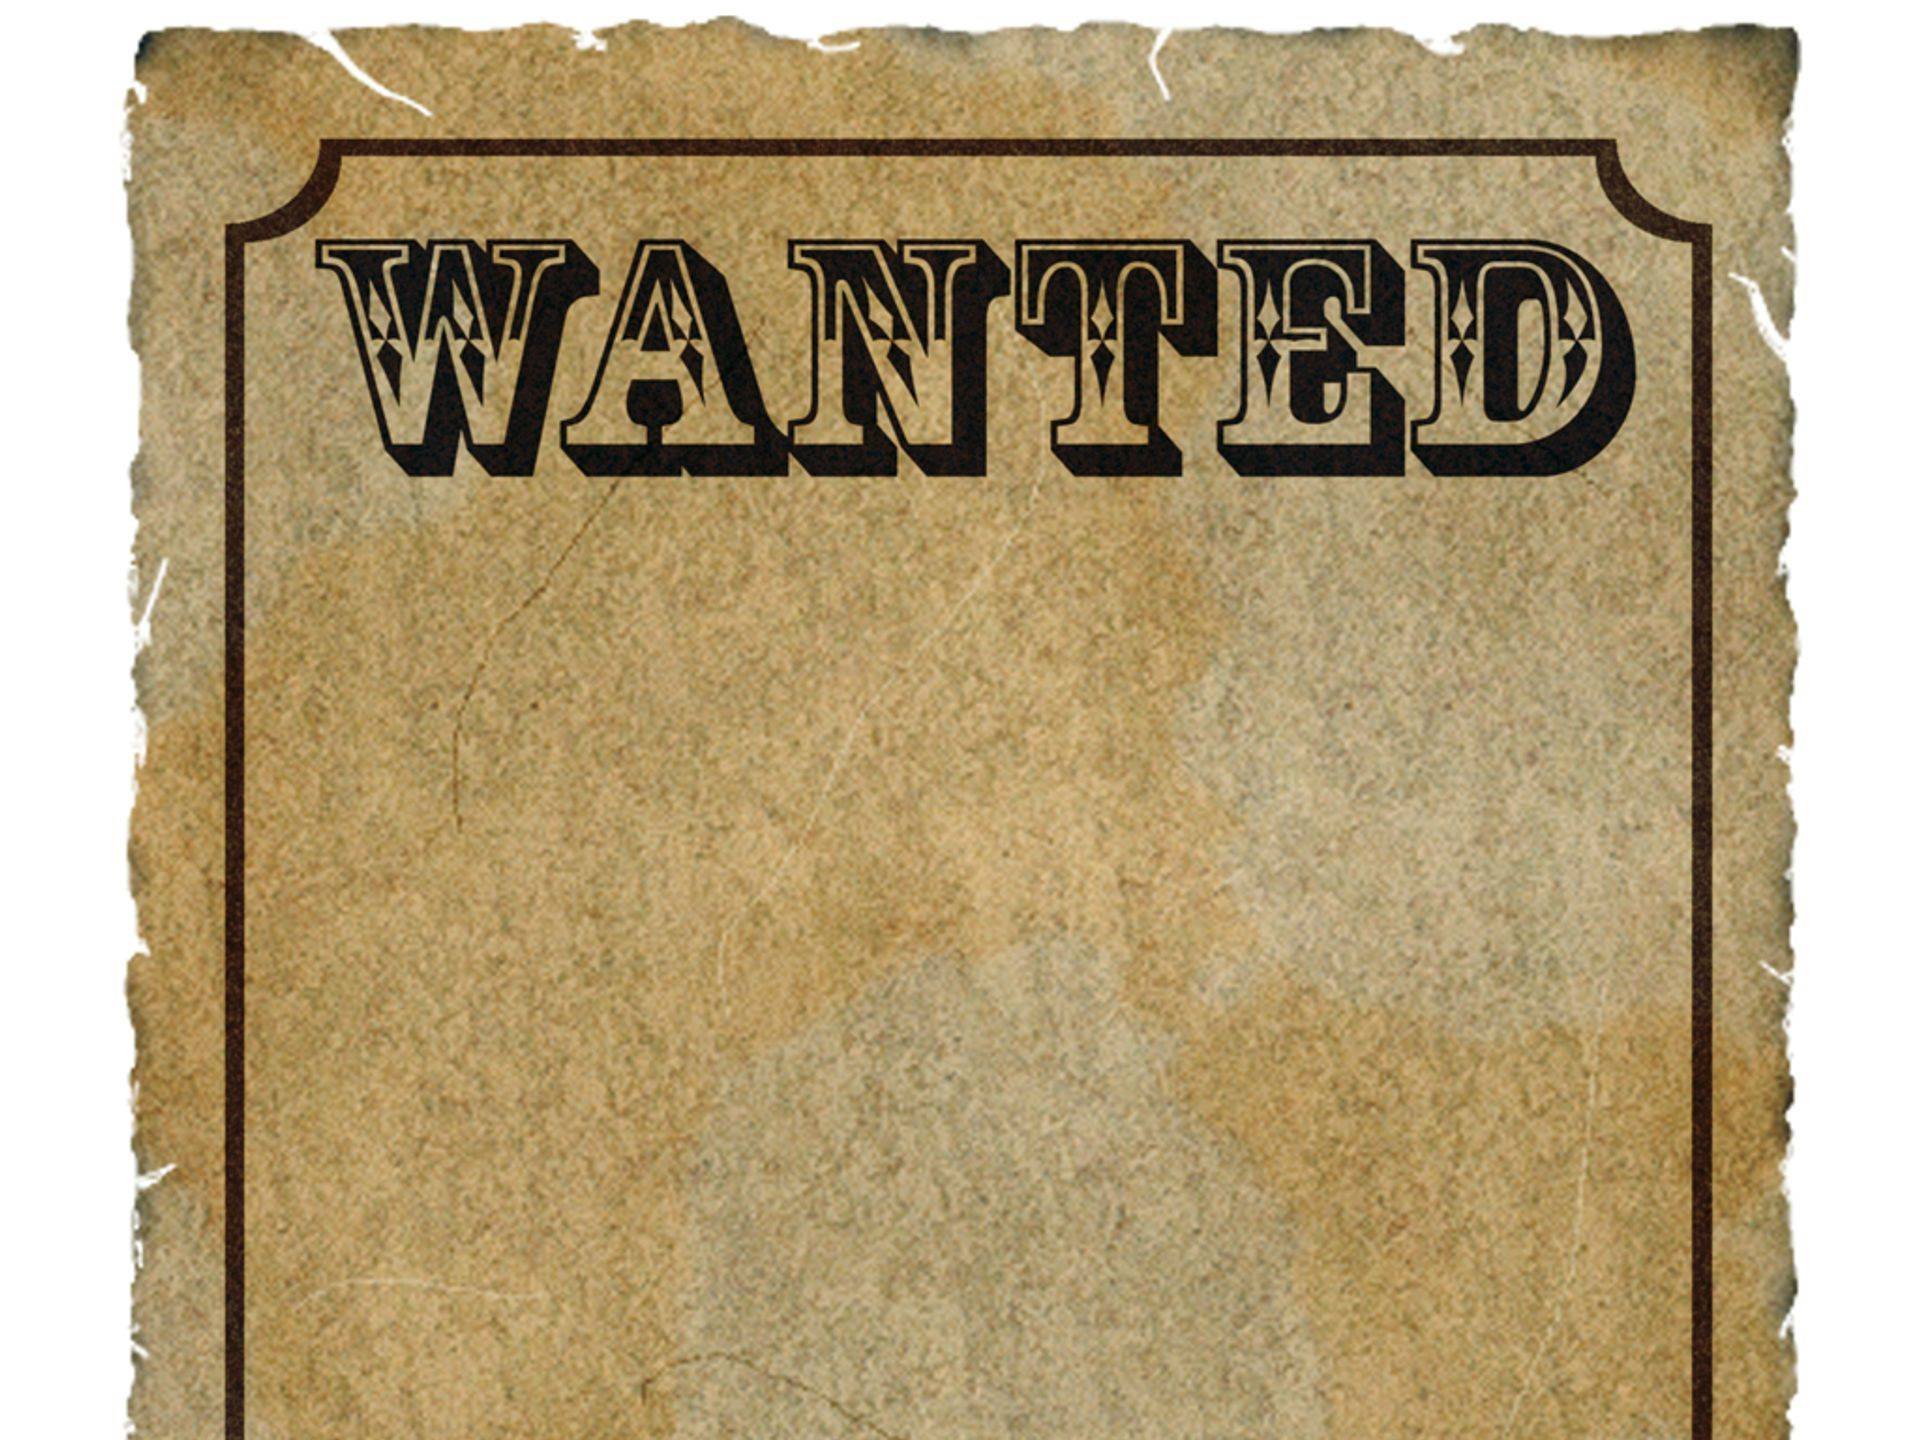 Lived talked wanted. Wanted плакат. Плакат розыска. Плакат разыскивается. Wanted листовка.